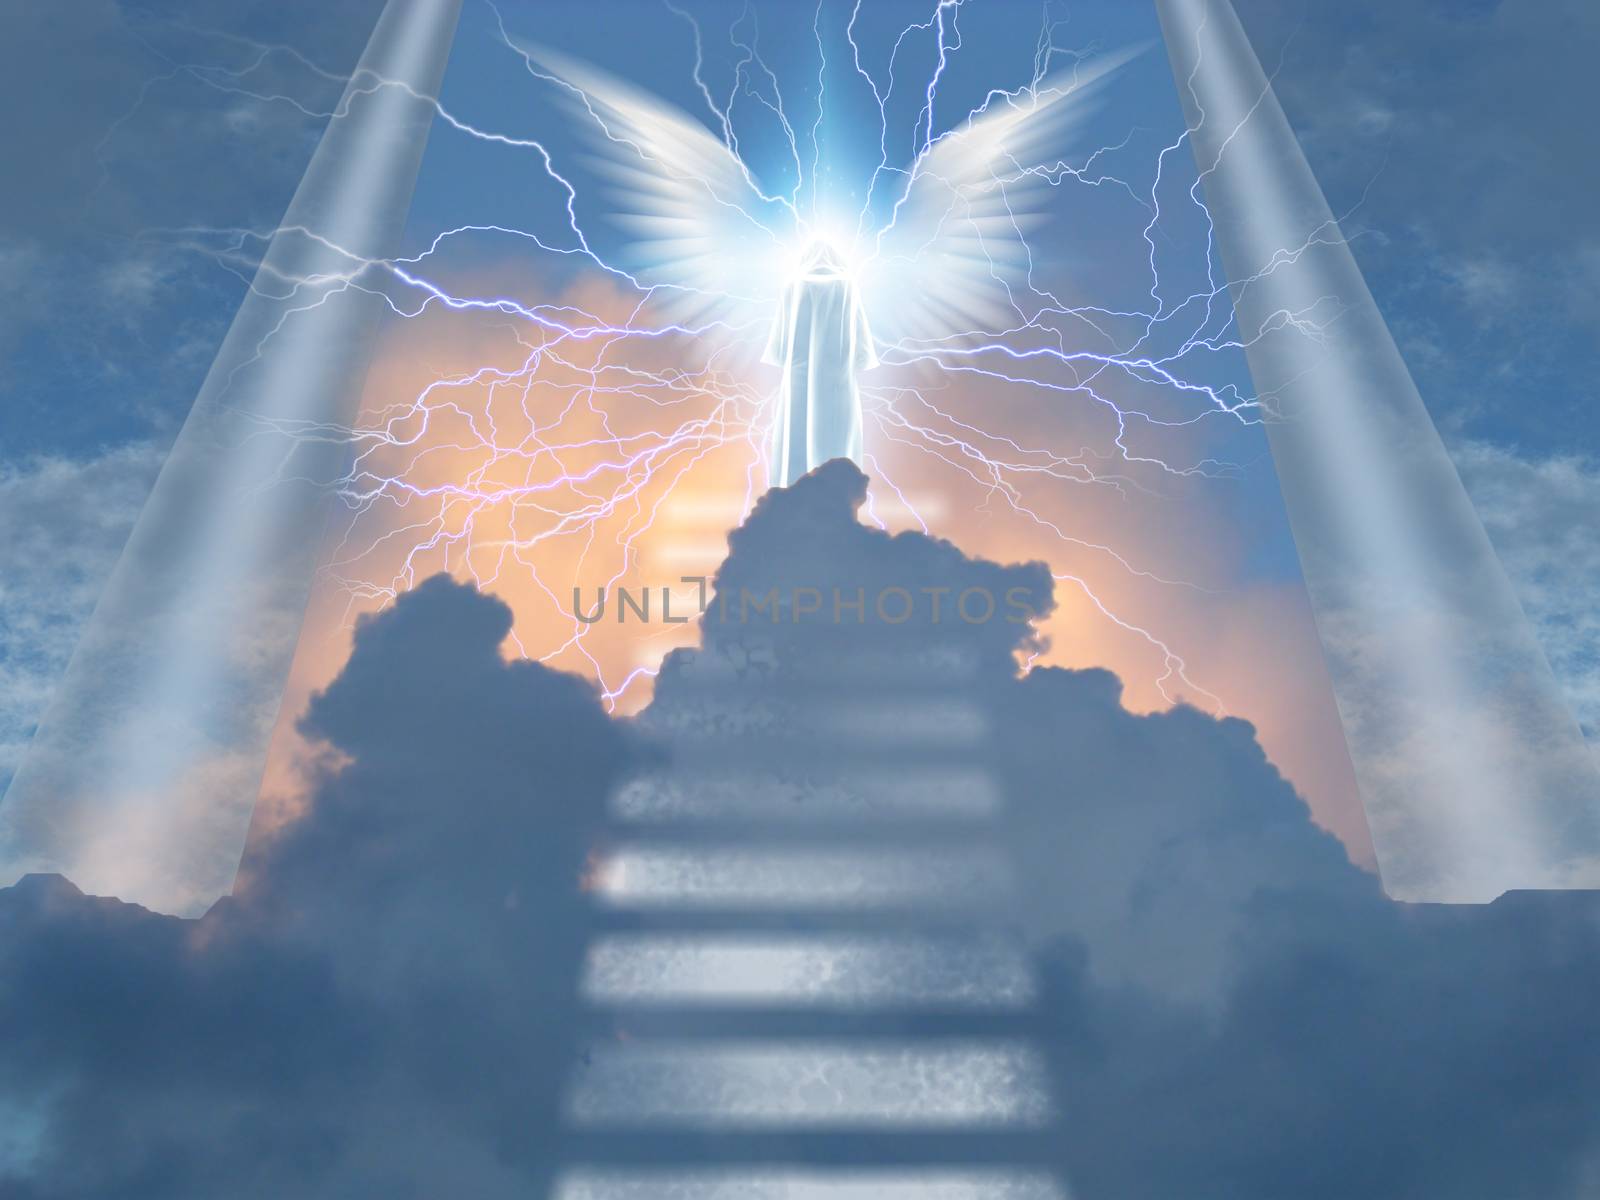 Angelic being atop stairway to heaven by applesstock